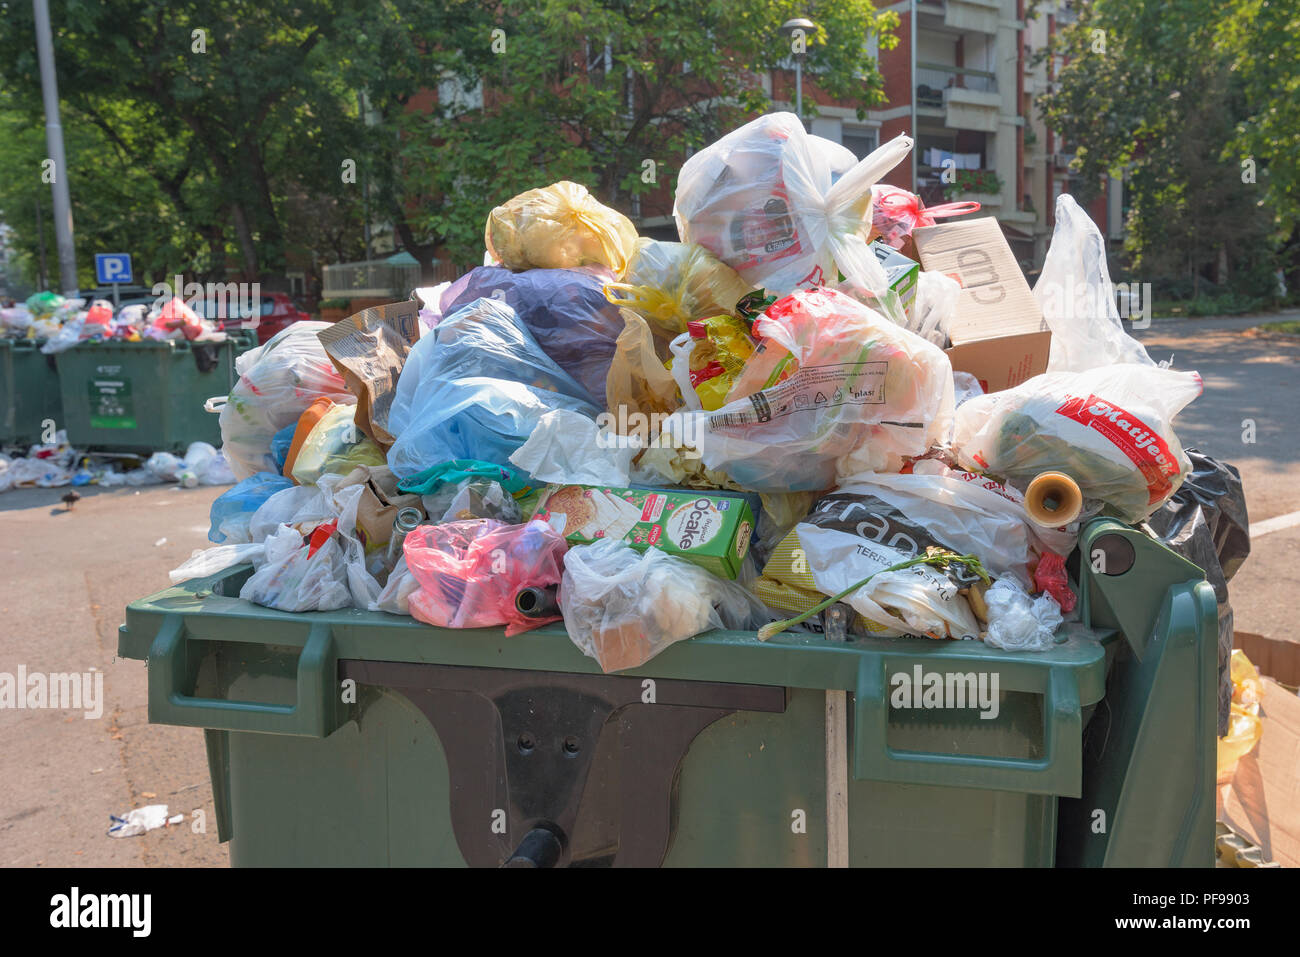 NOVI SAD, SERBIA - AUGUST 18, 2018: Municipal solid waste or communal garbage is overflowing containers in Novi Sad during weekends, illustrative edit Stock Photo